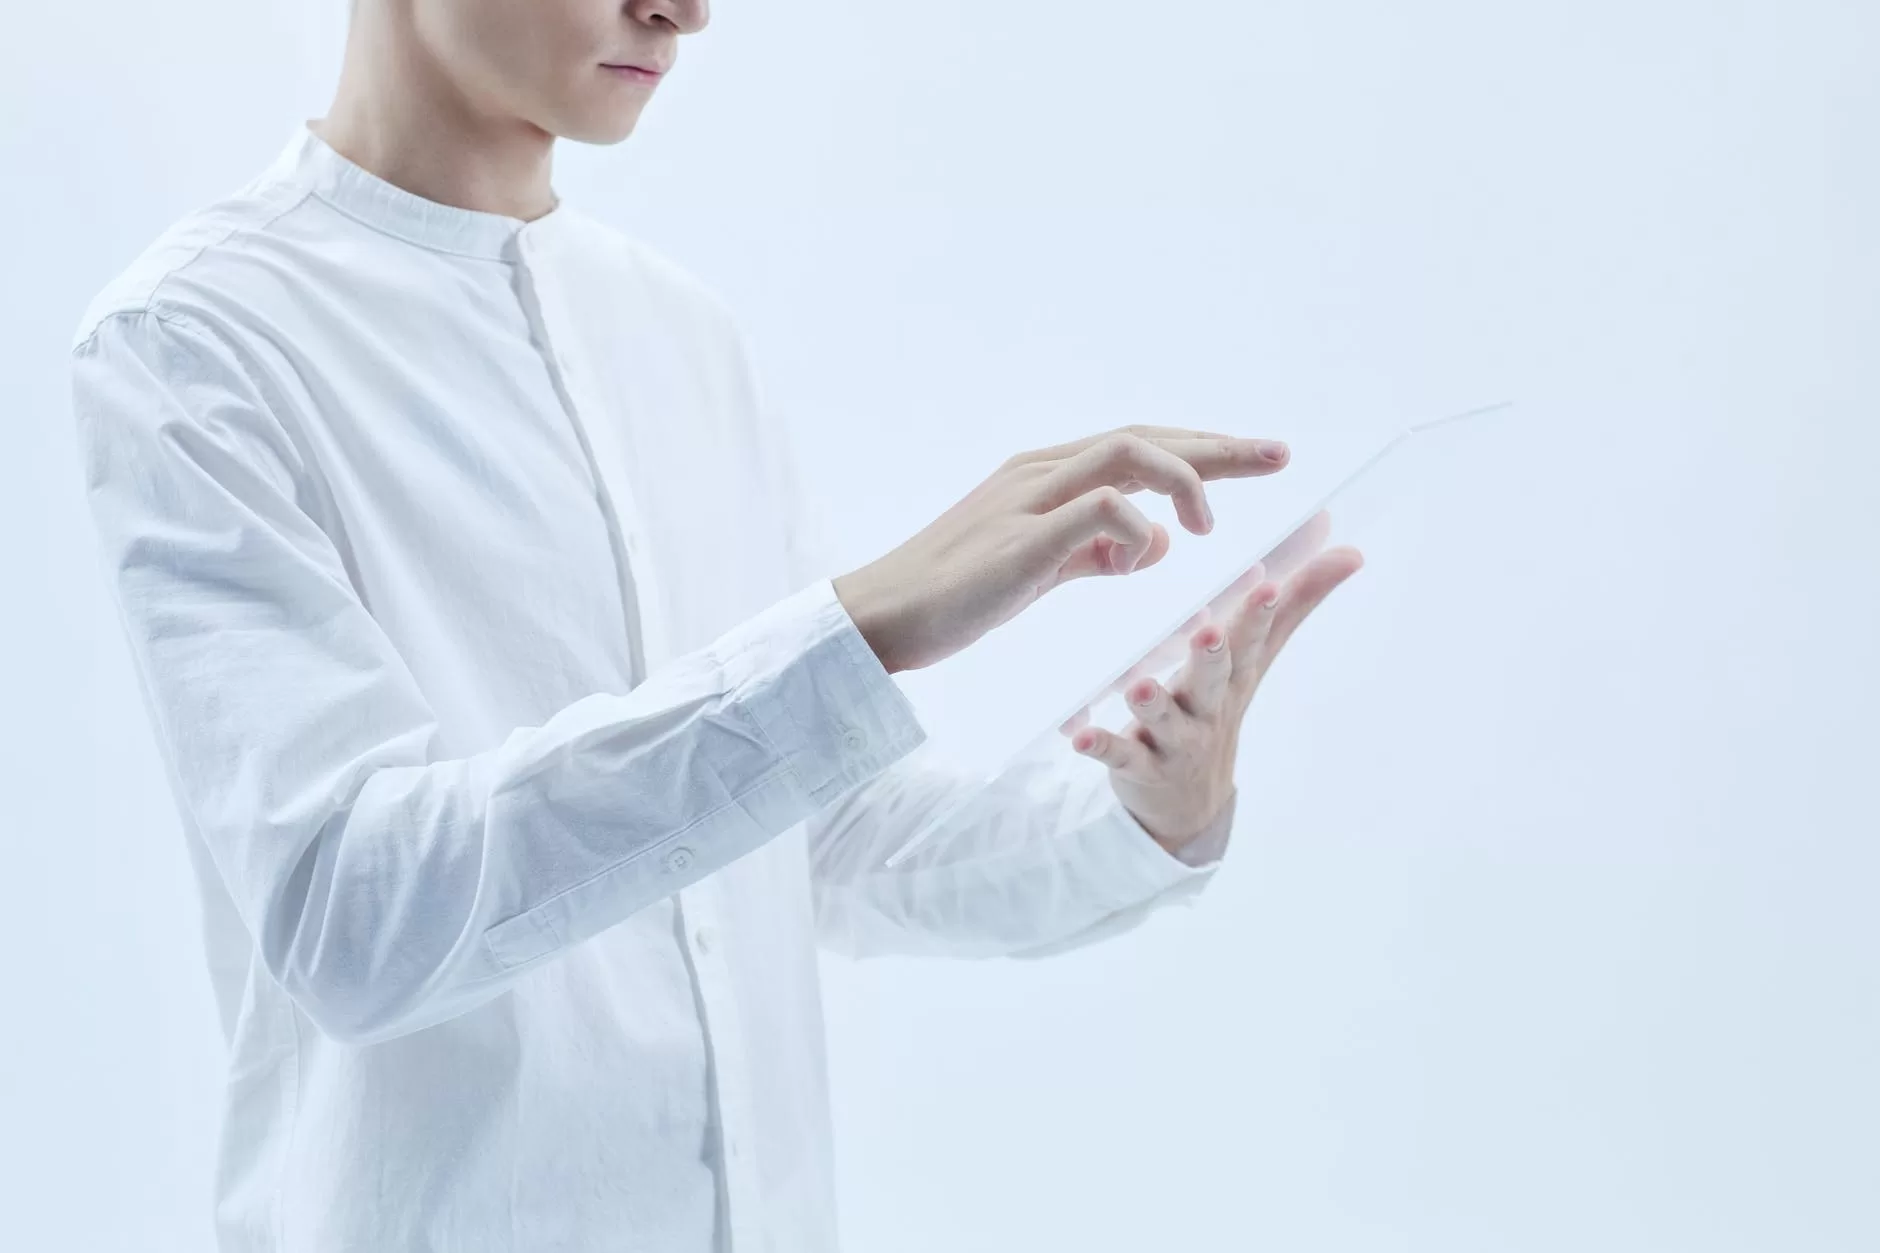 a person in white long sleeves holding a clear glass